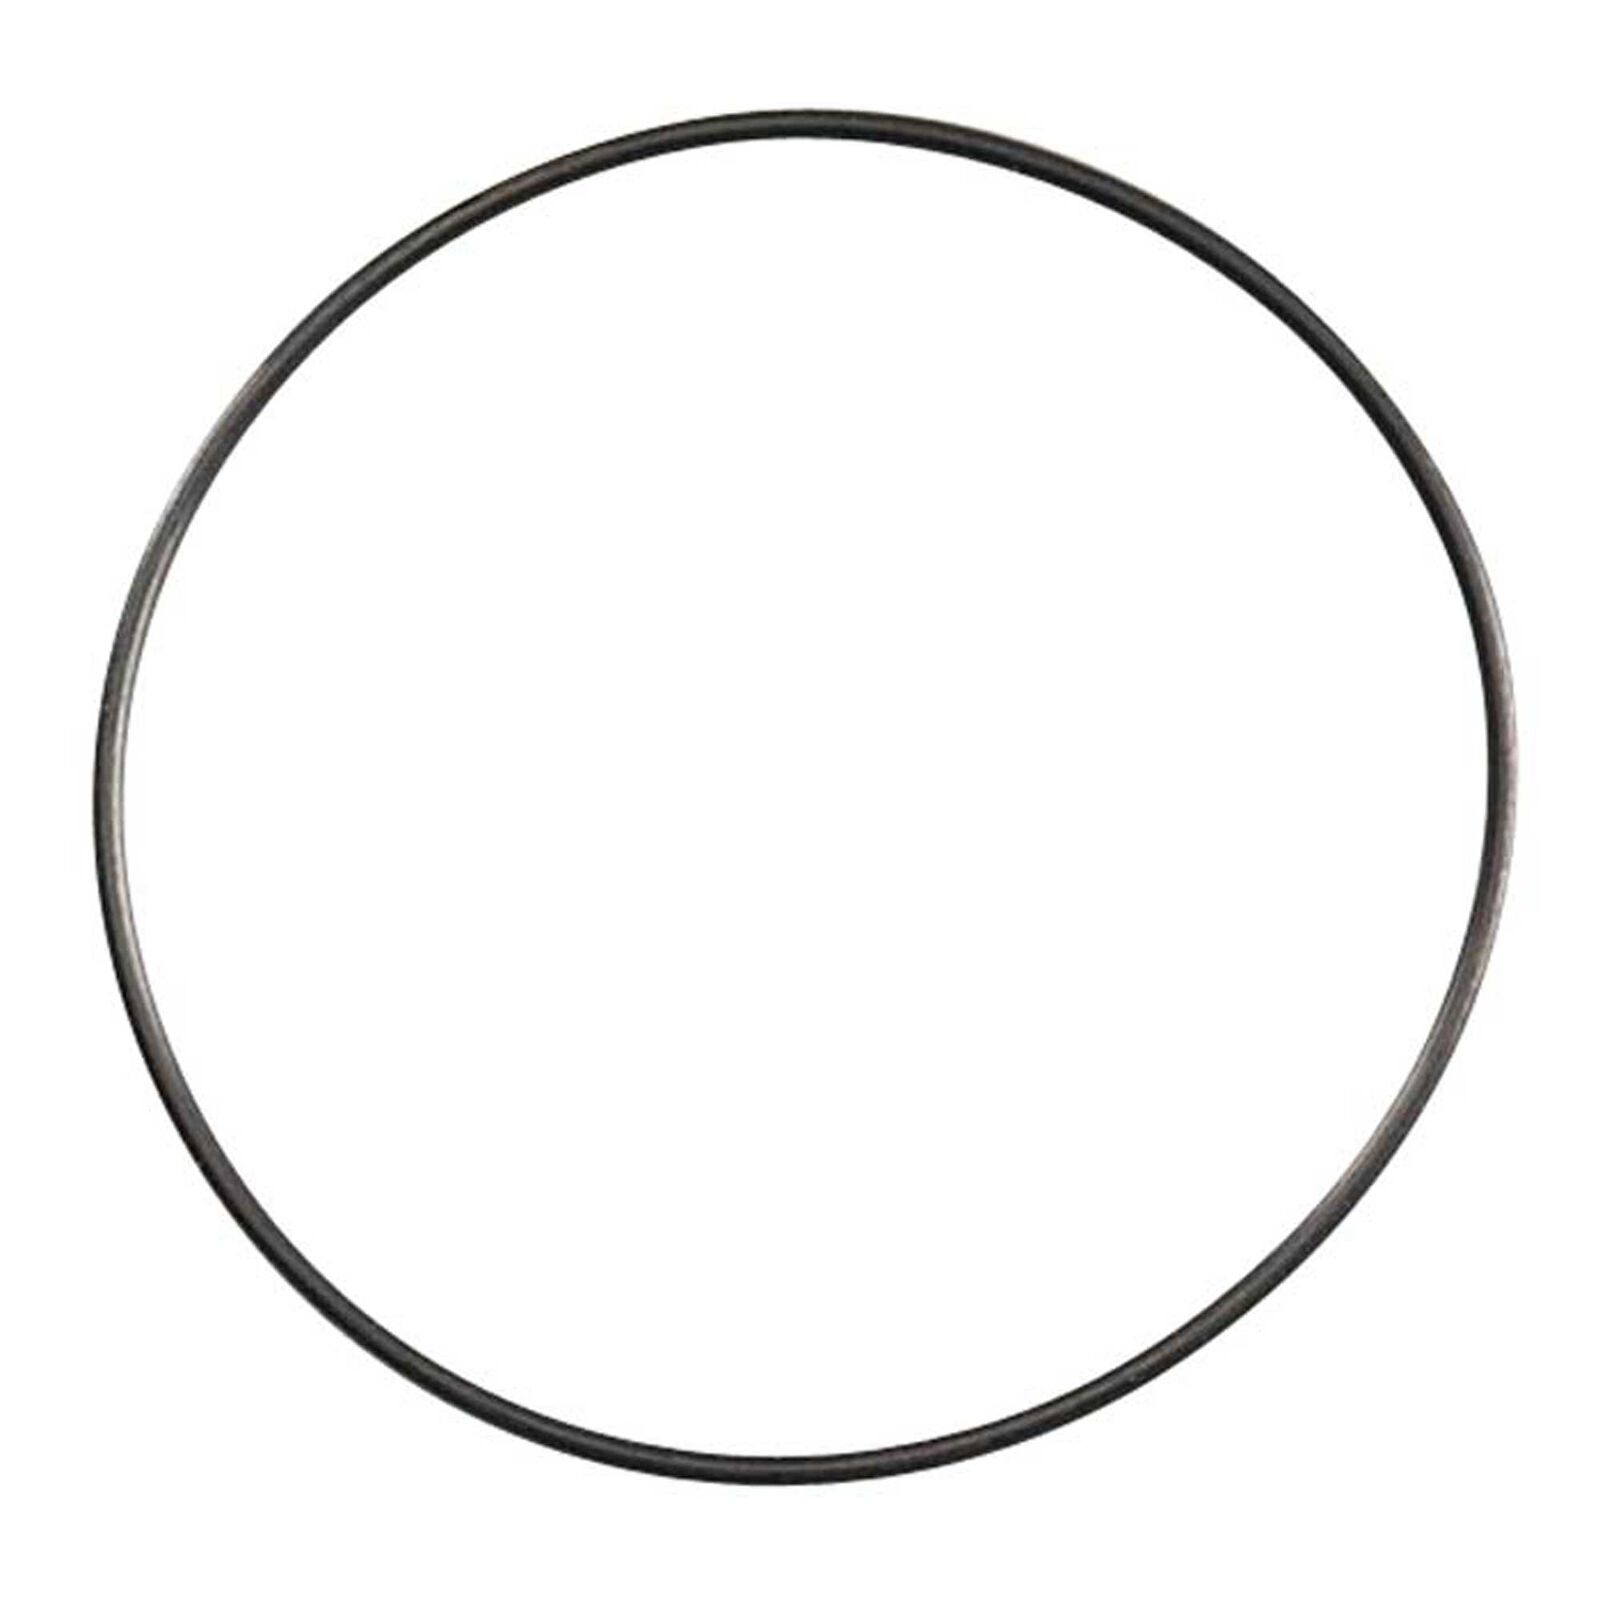 Cover Gasket: FS-70 Ultimate